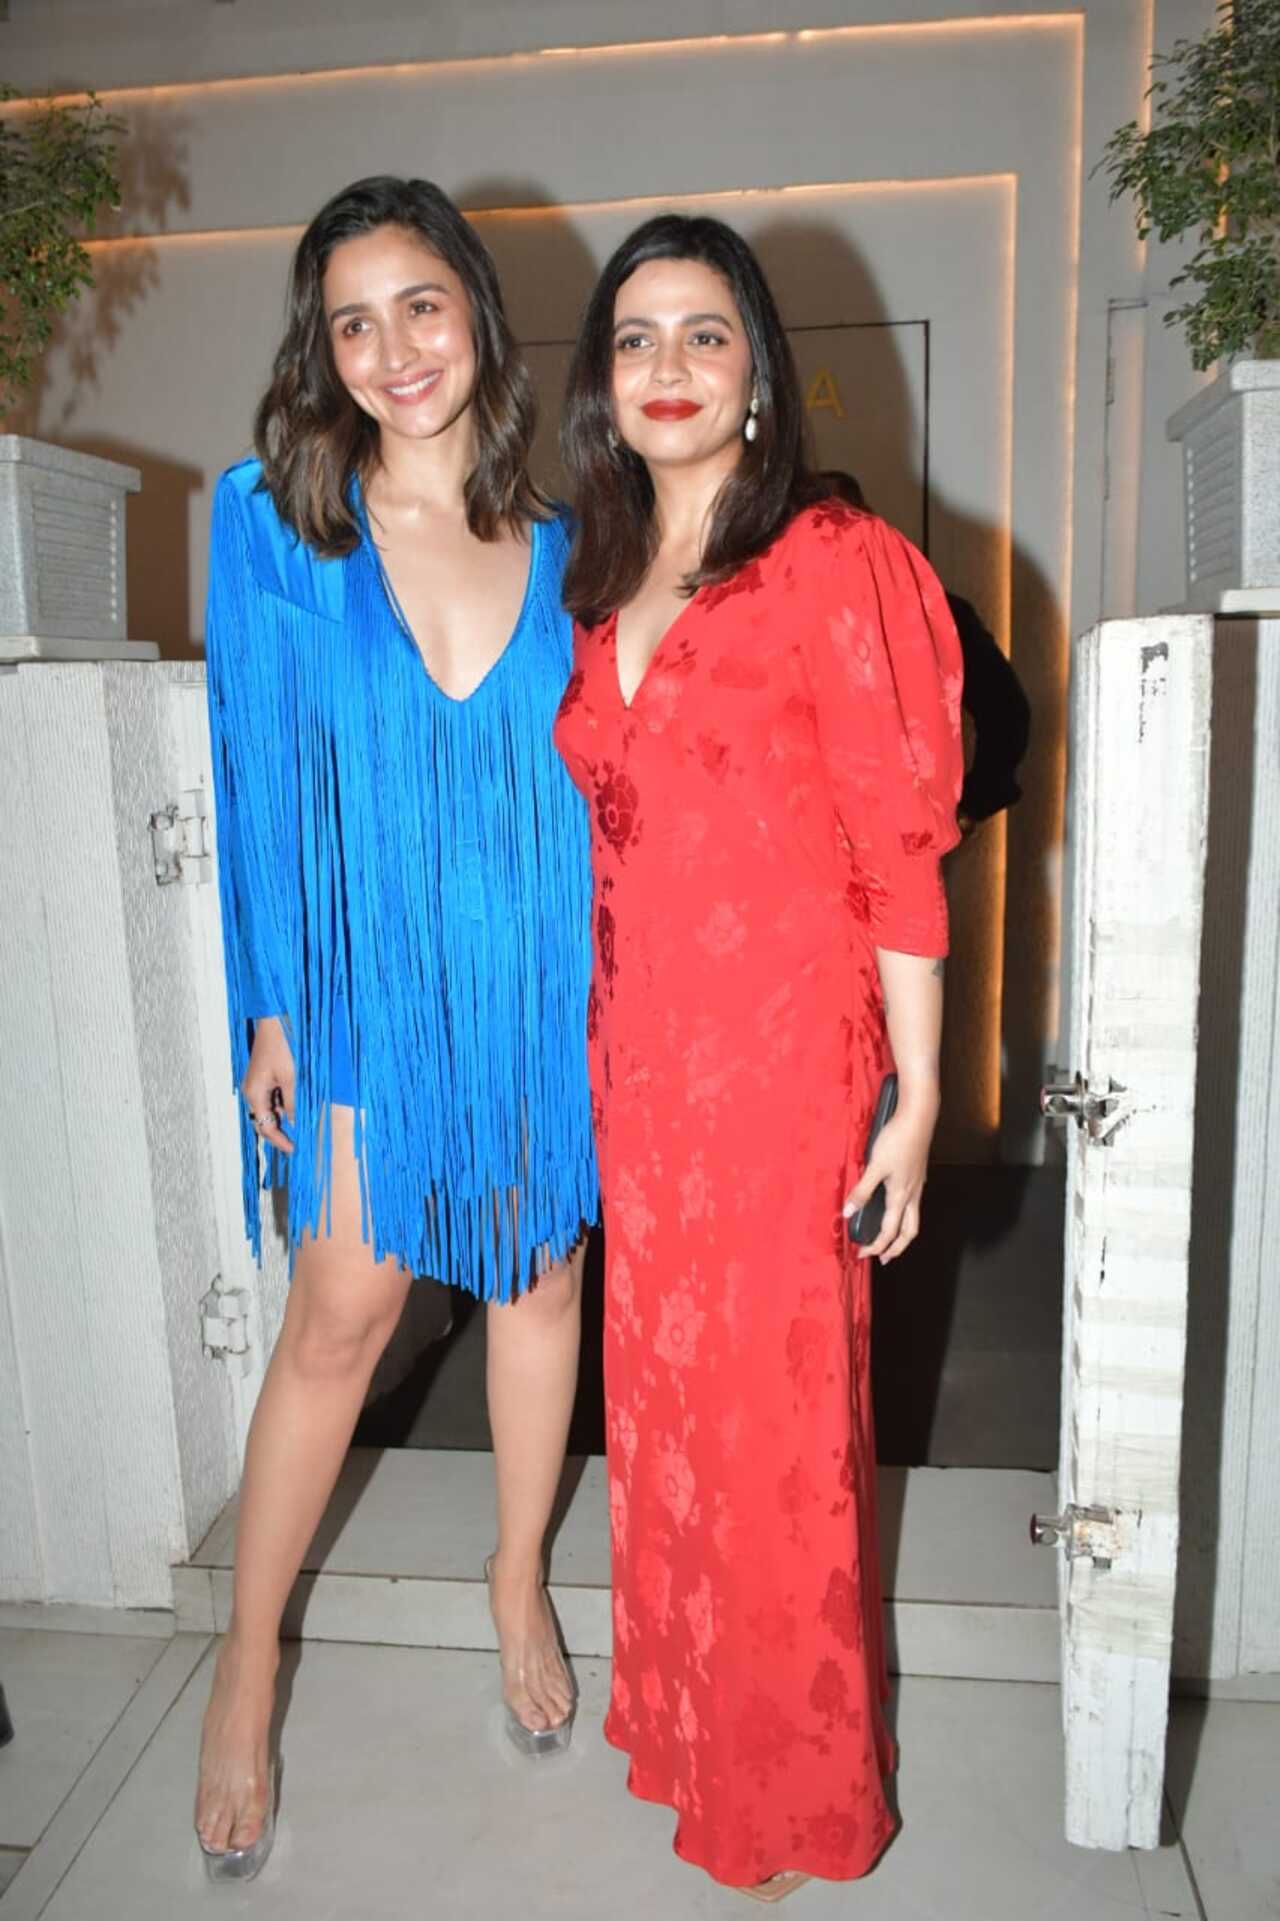 Alia was with her elder sister Shaheen Bhatt. They looked lovely together as they posed for the paparazzi